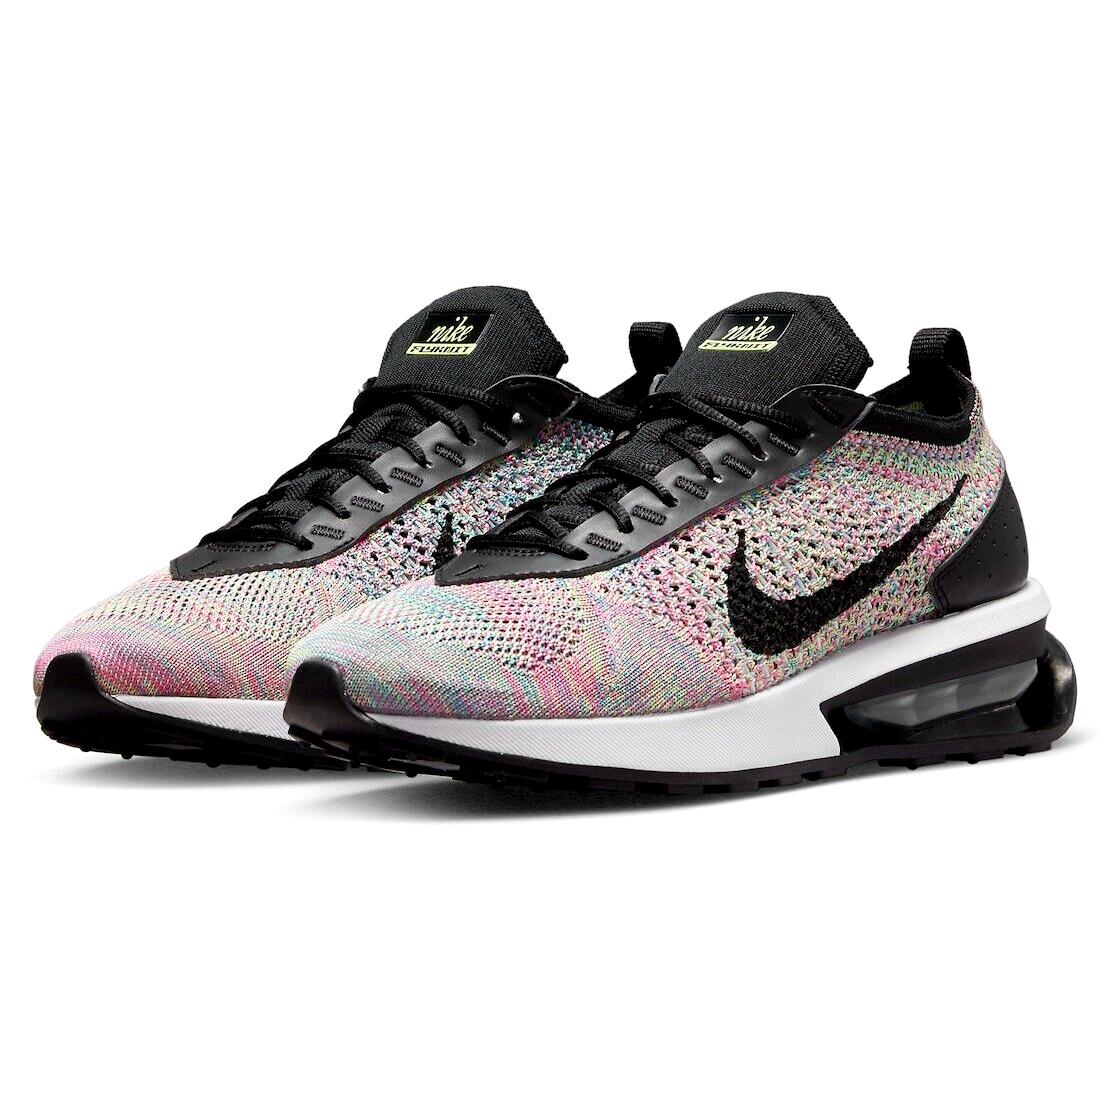 Nike Air Max Flyknit Racer Womens Size 11.5 Shoes DM9073 300 Ghost Green Pink